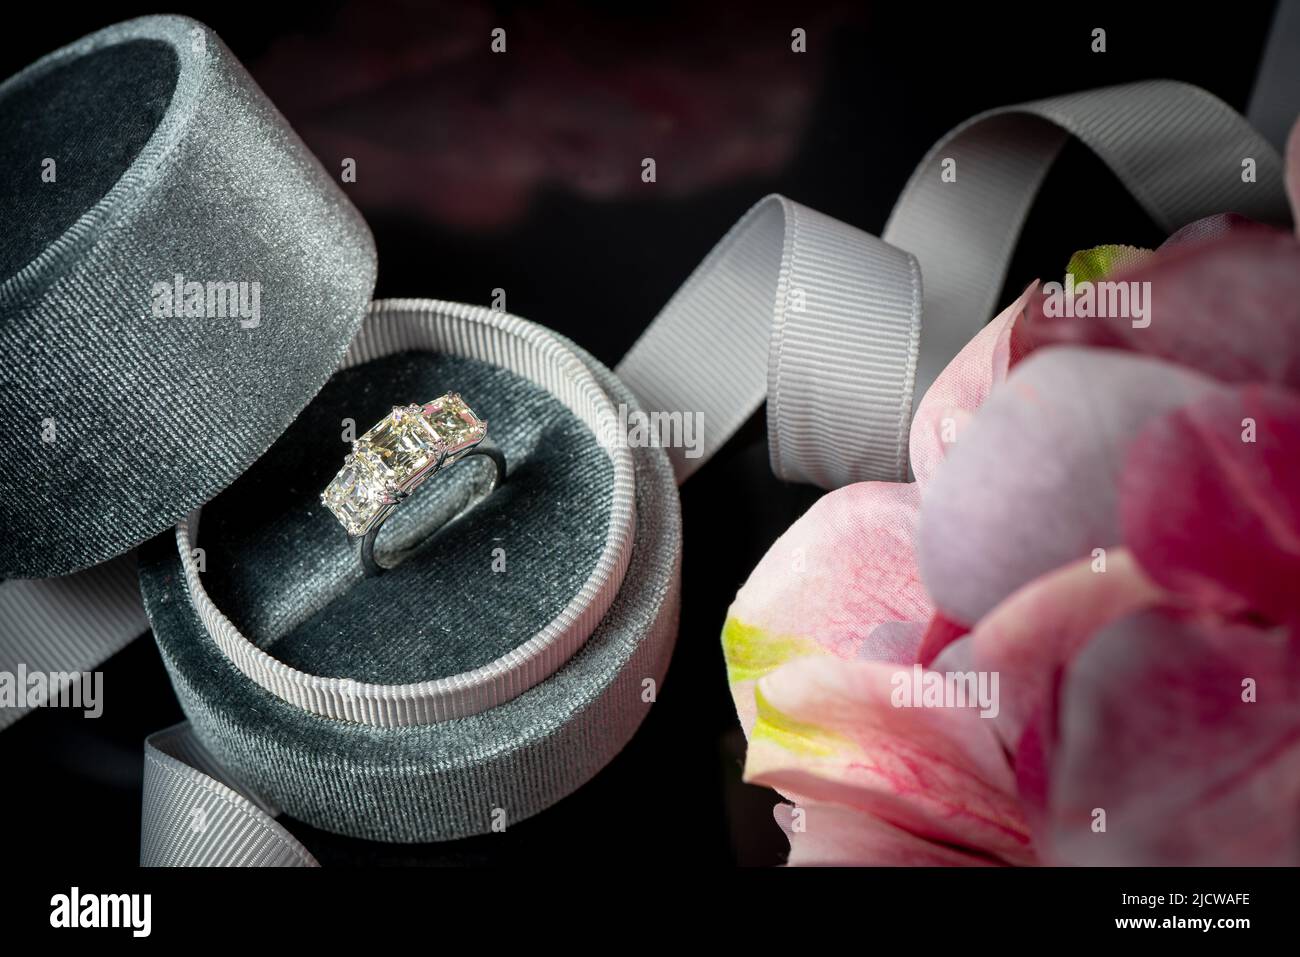 Diamonds ring as a gift for anniversary Stock Photo